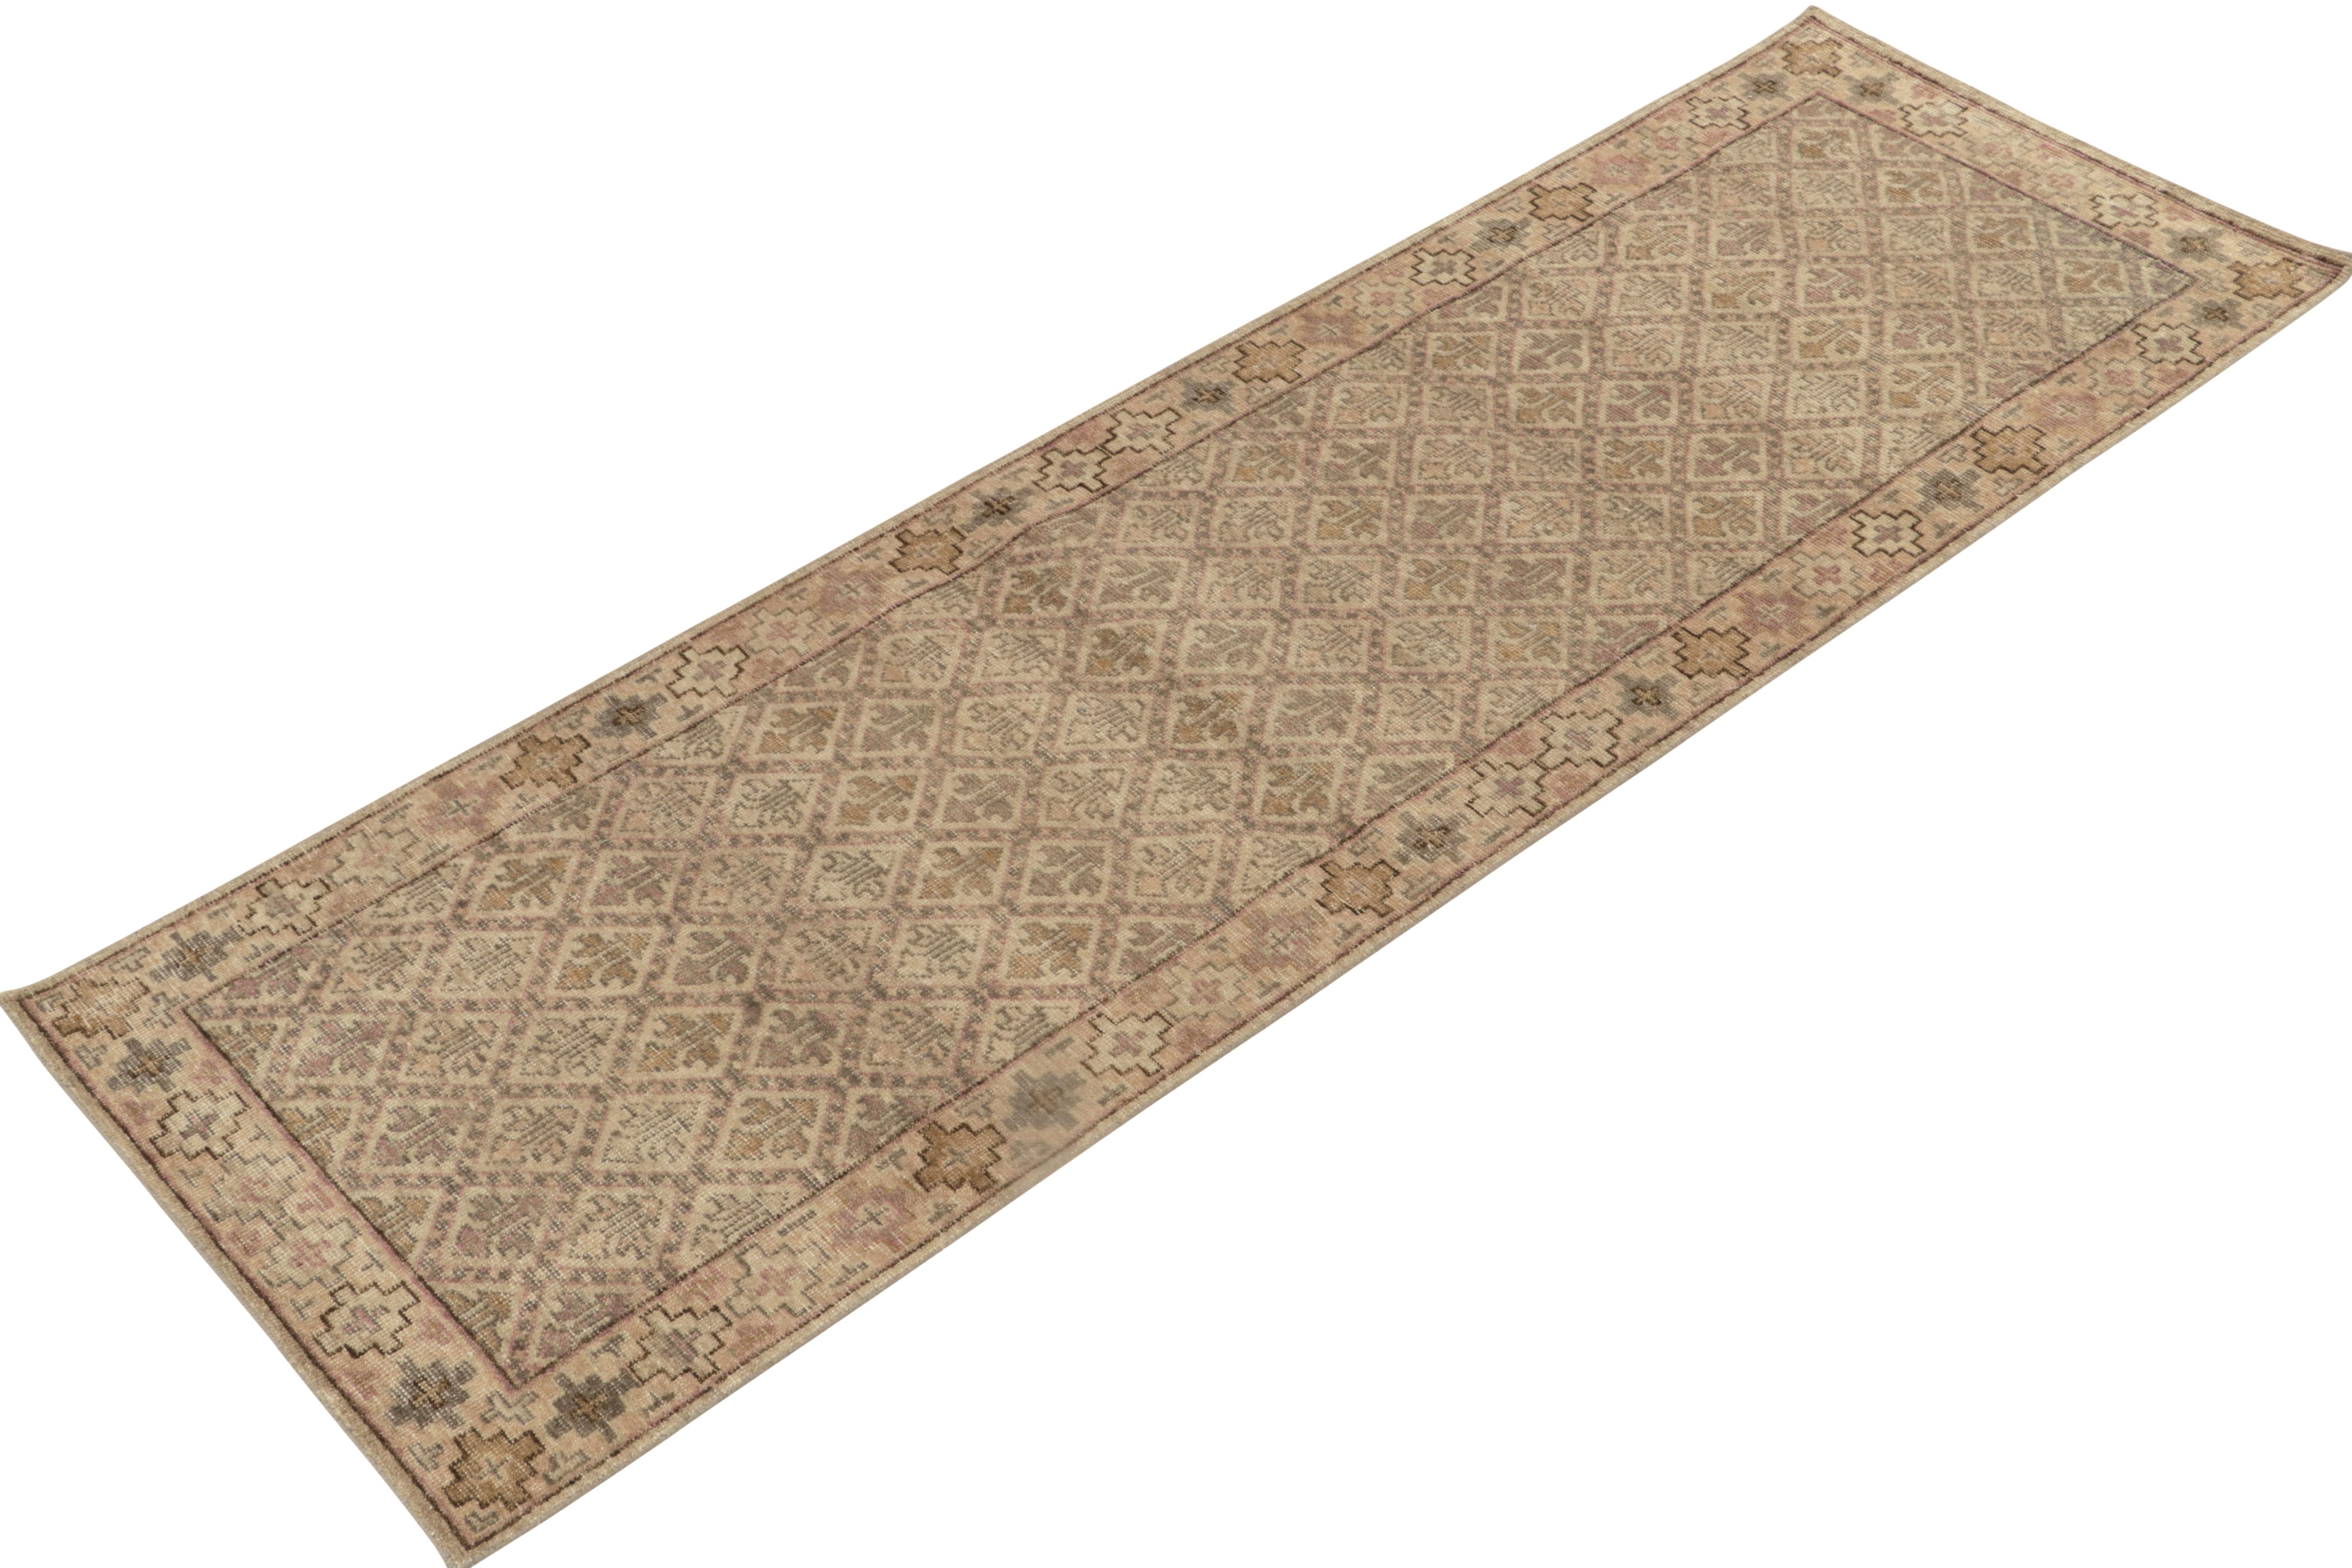 A 3×10 hand-knotted wool runner from Rug & Kilim’s Homage Collection; a vital new encyclopedia of style and texture.

On the Design:

This rug is inspired by antique tribal patterns of a very forgiving provenance, recaptured in muted beige-brown,